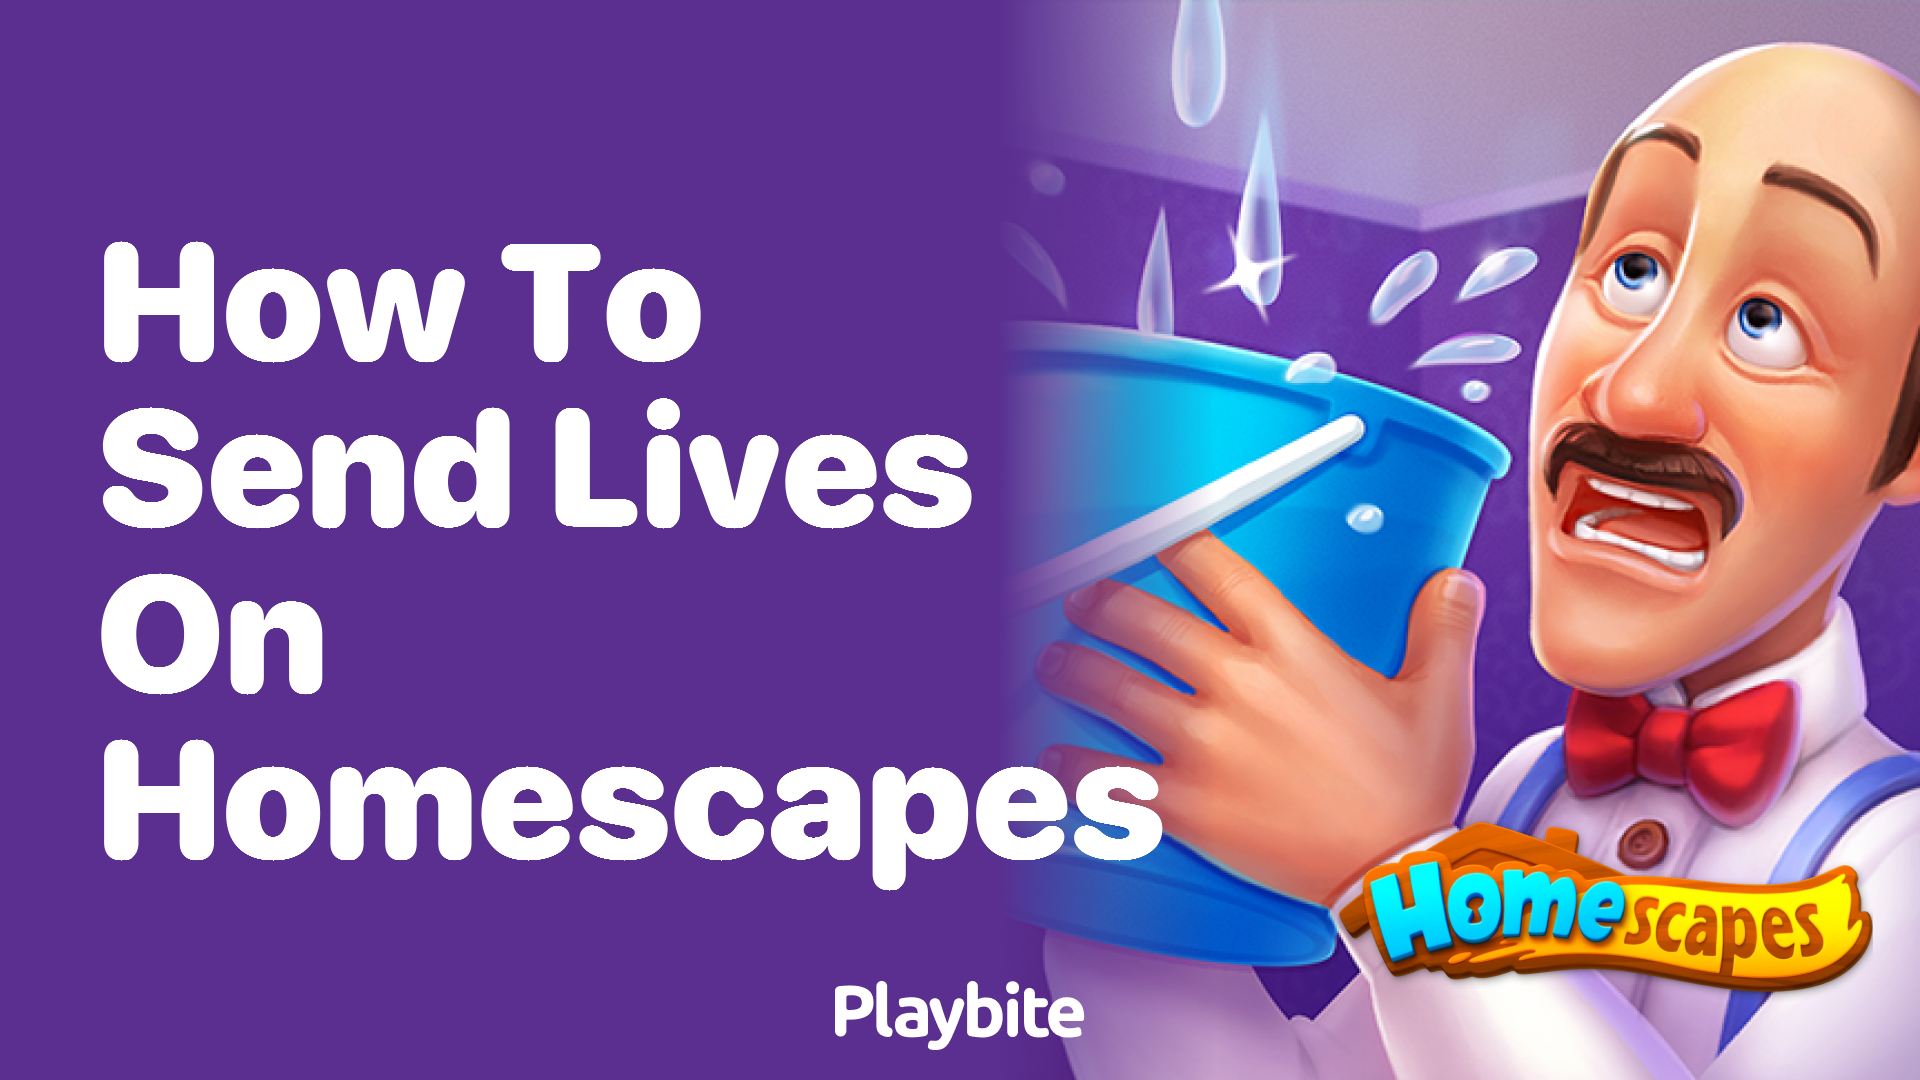 How to Send Lives on Homescapes